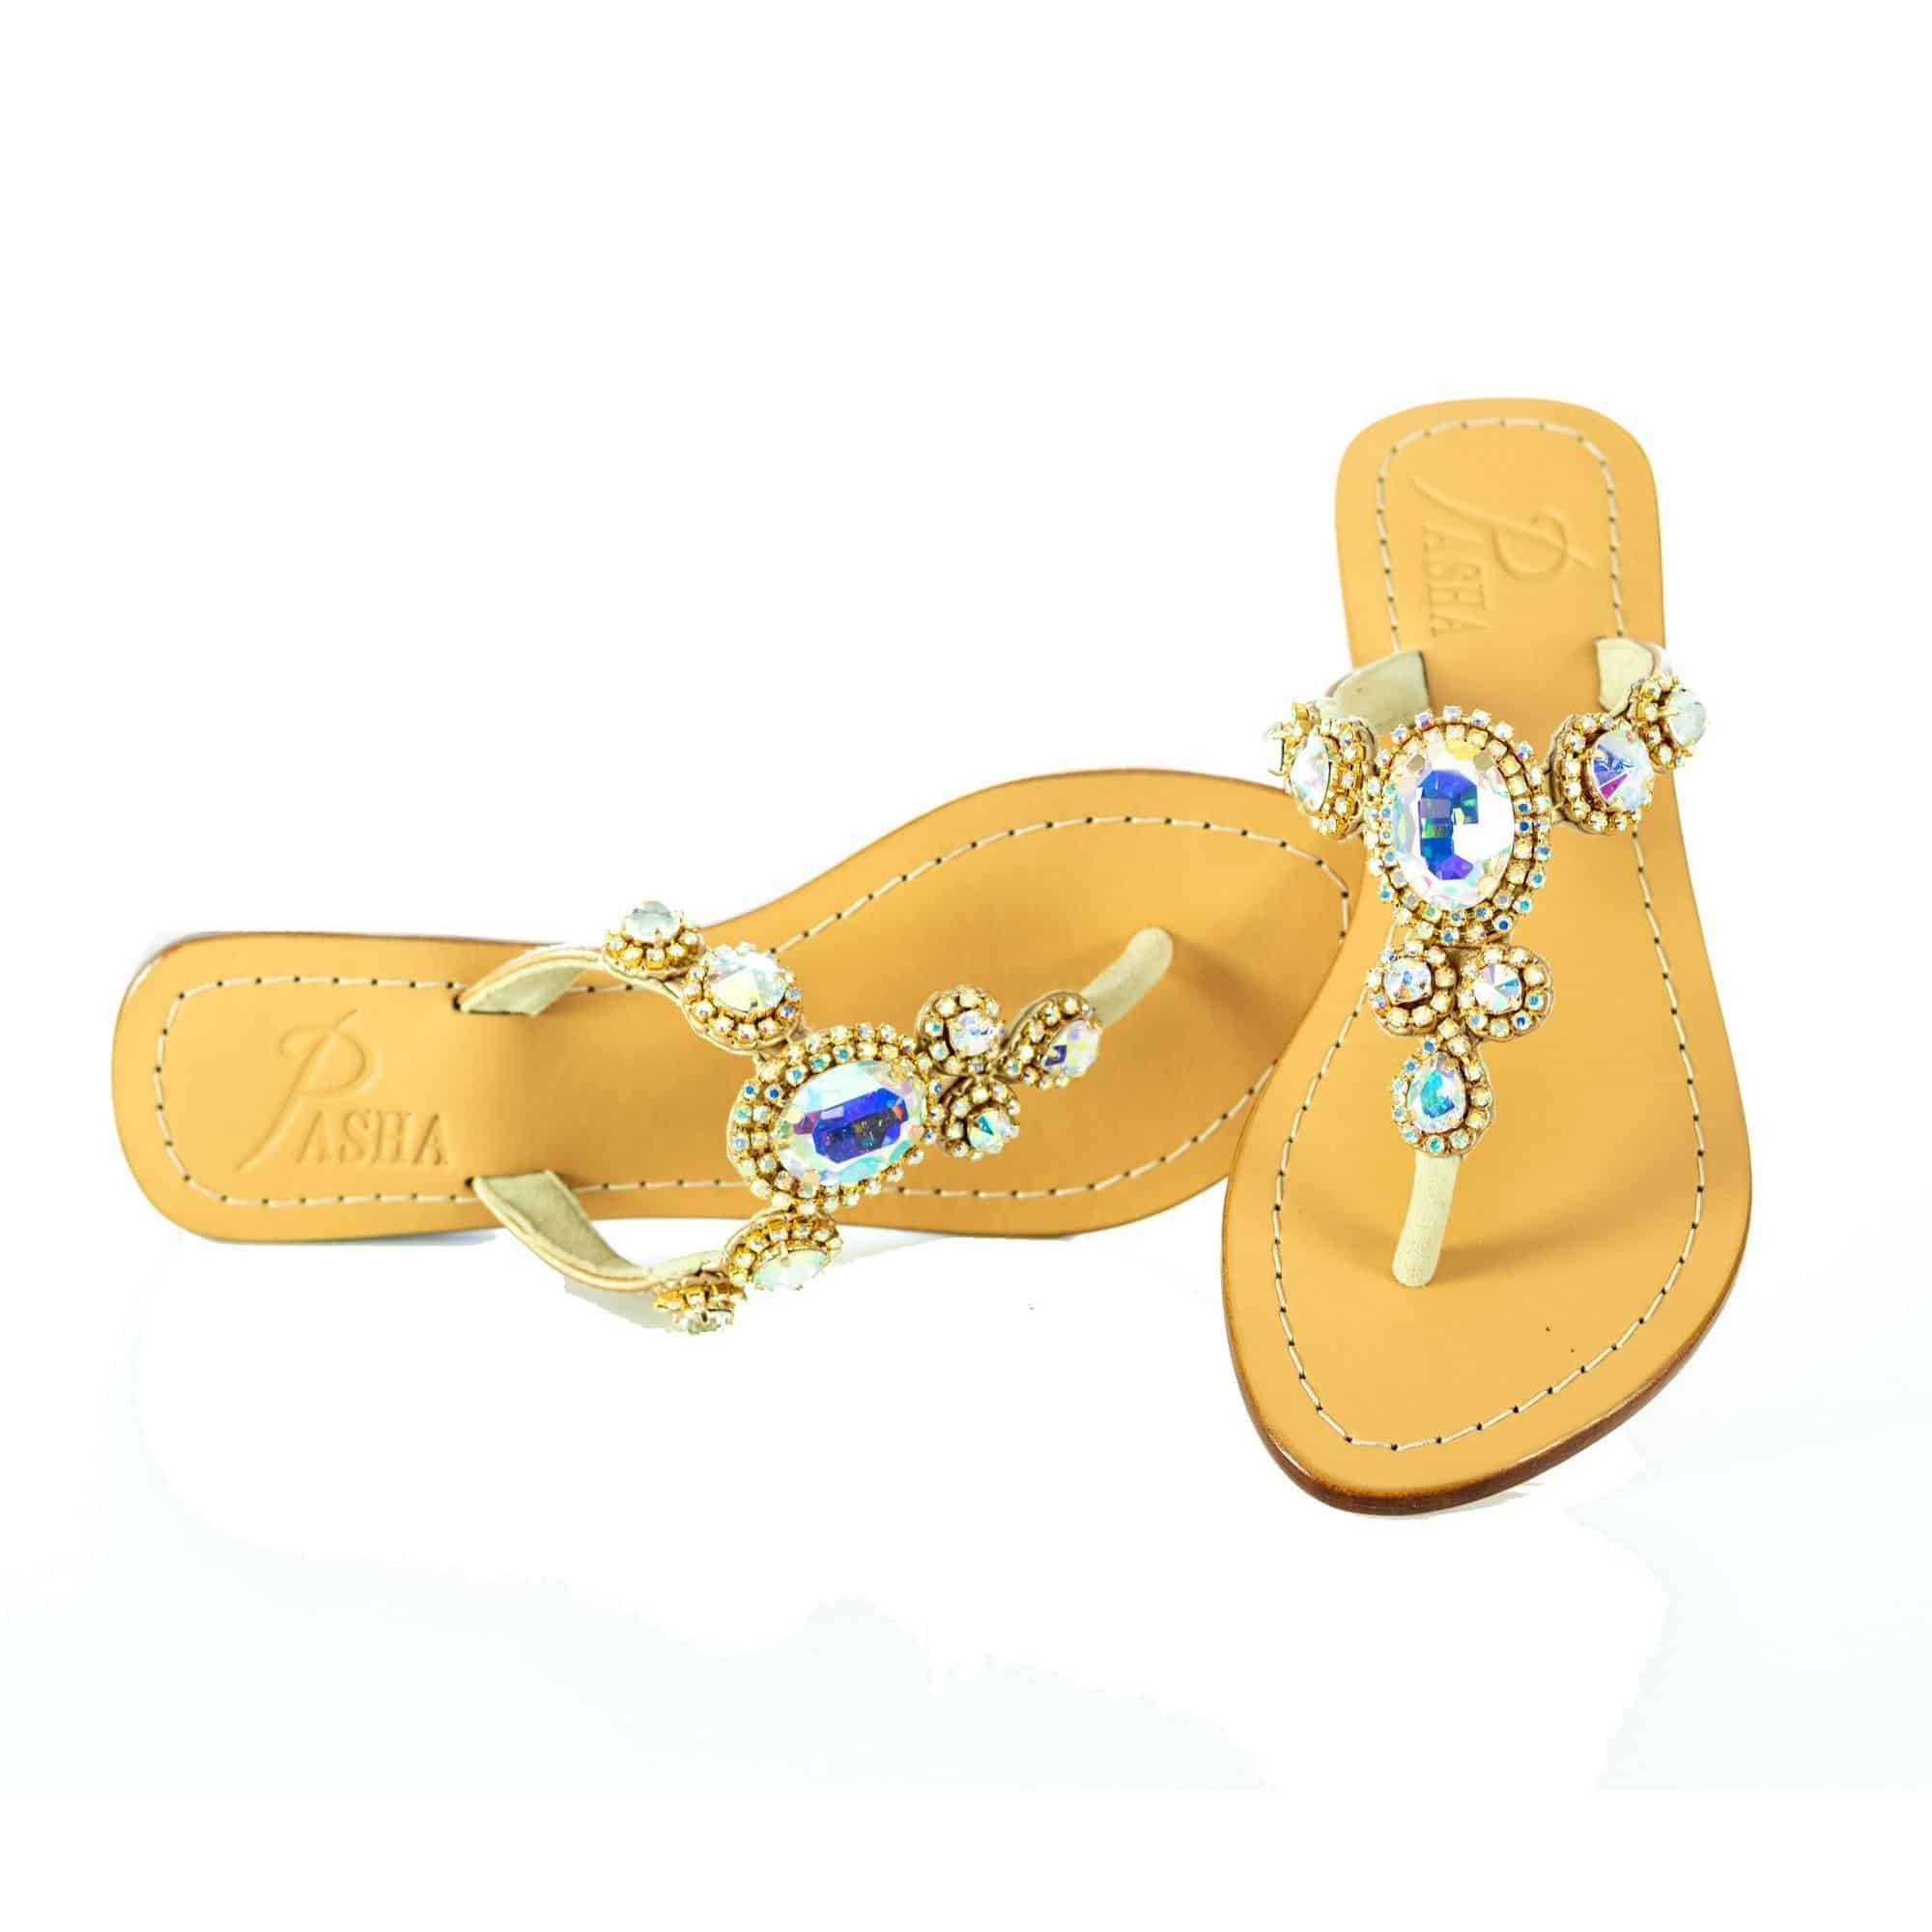 CORINTH - Pasha - Jewelry for your feet